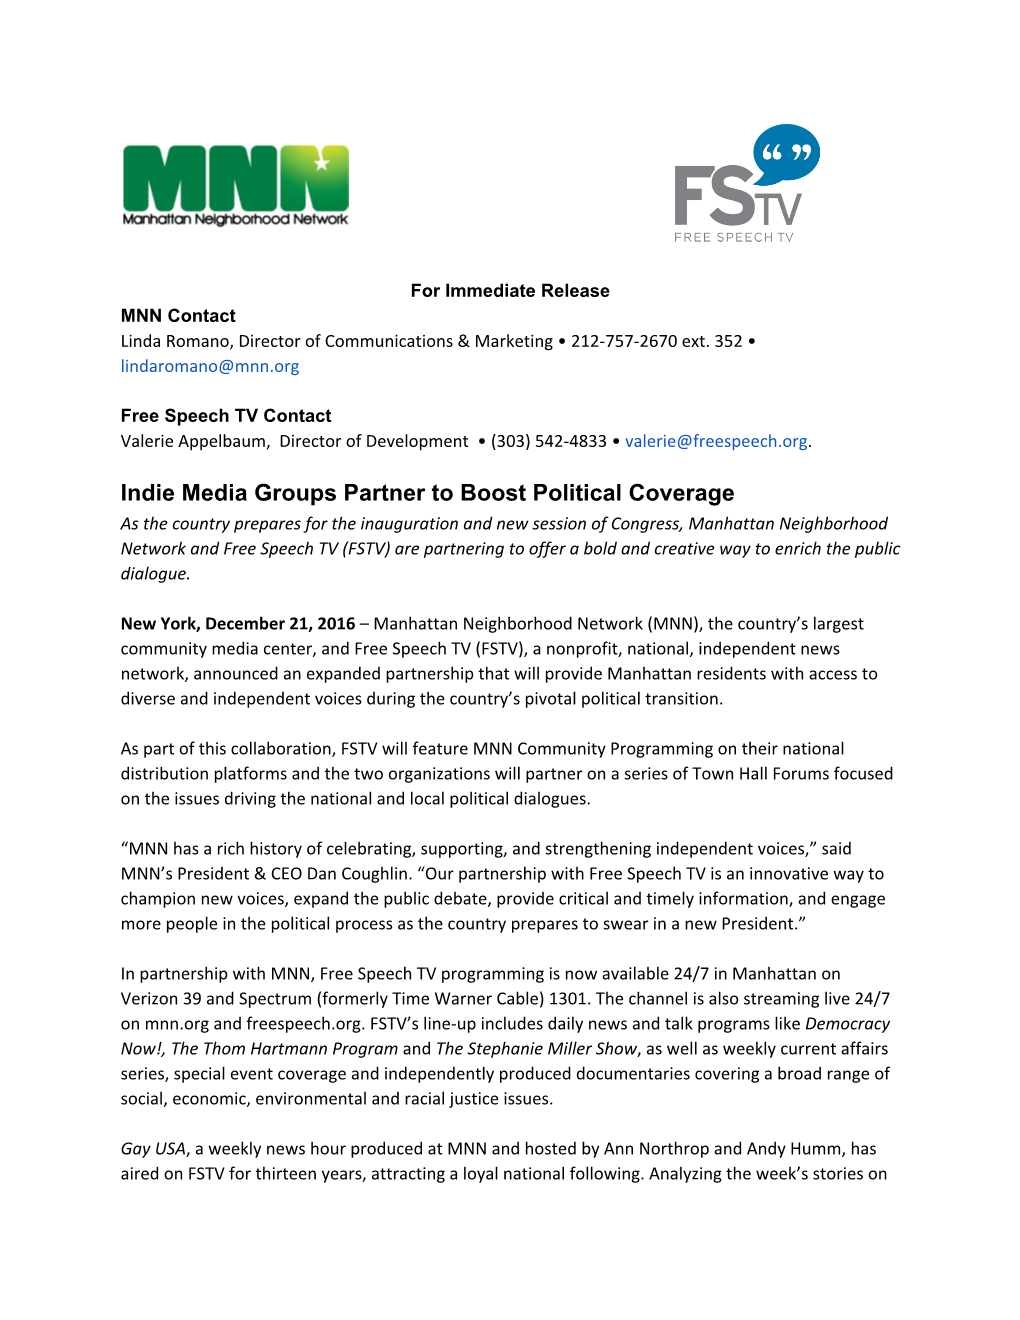 Indie Media Groups Partner to Boost Political Coverage